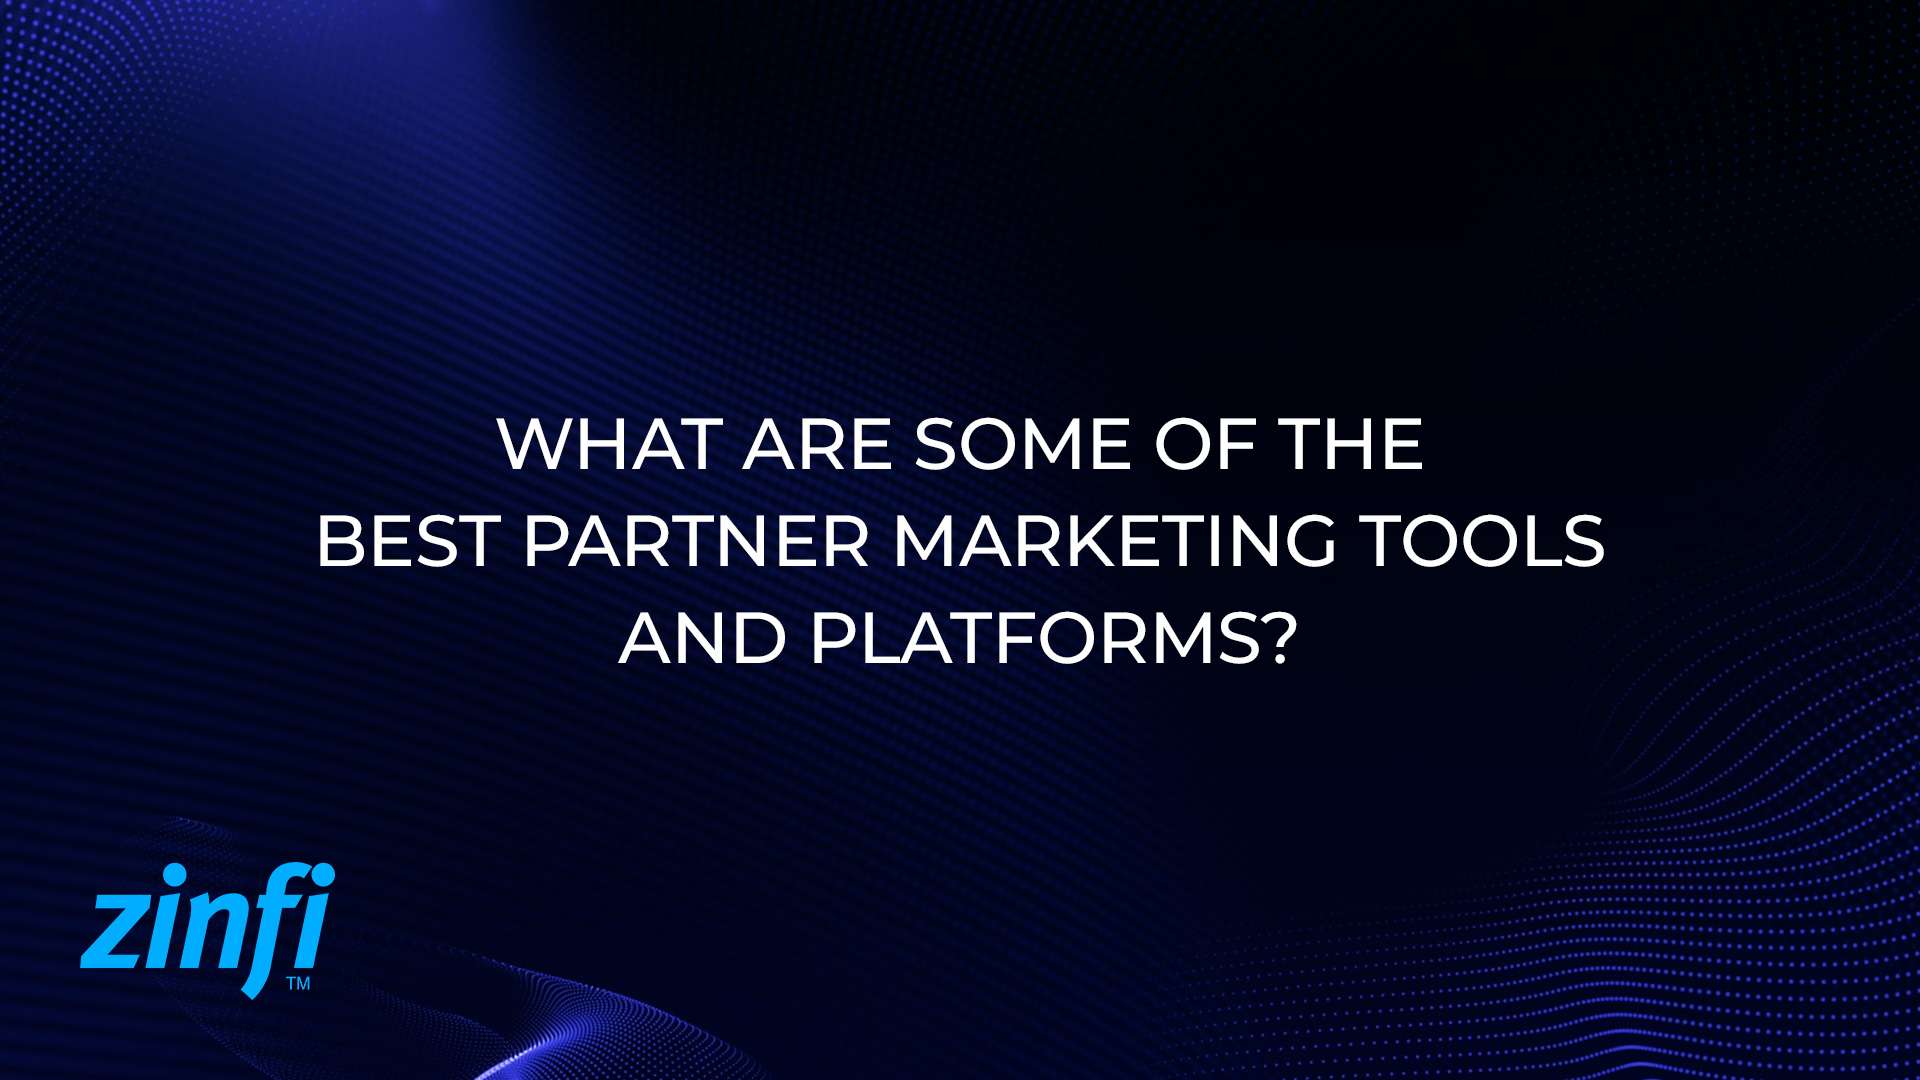 What are some of the best partner marketing tools and platforms